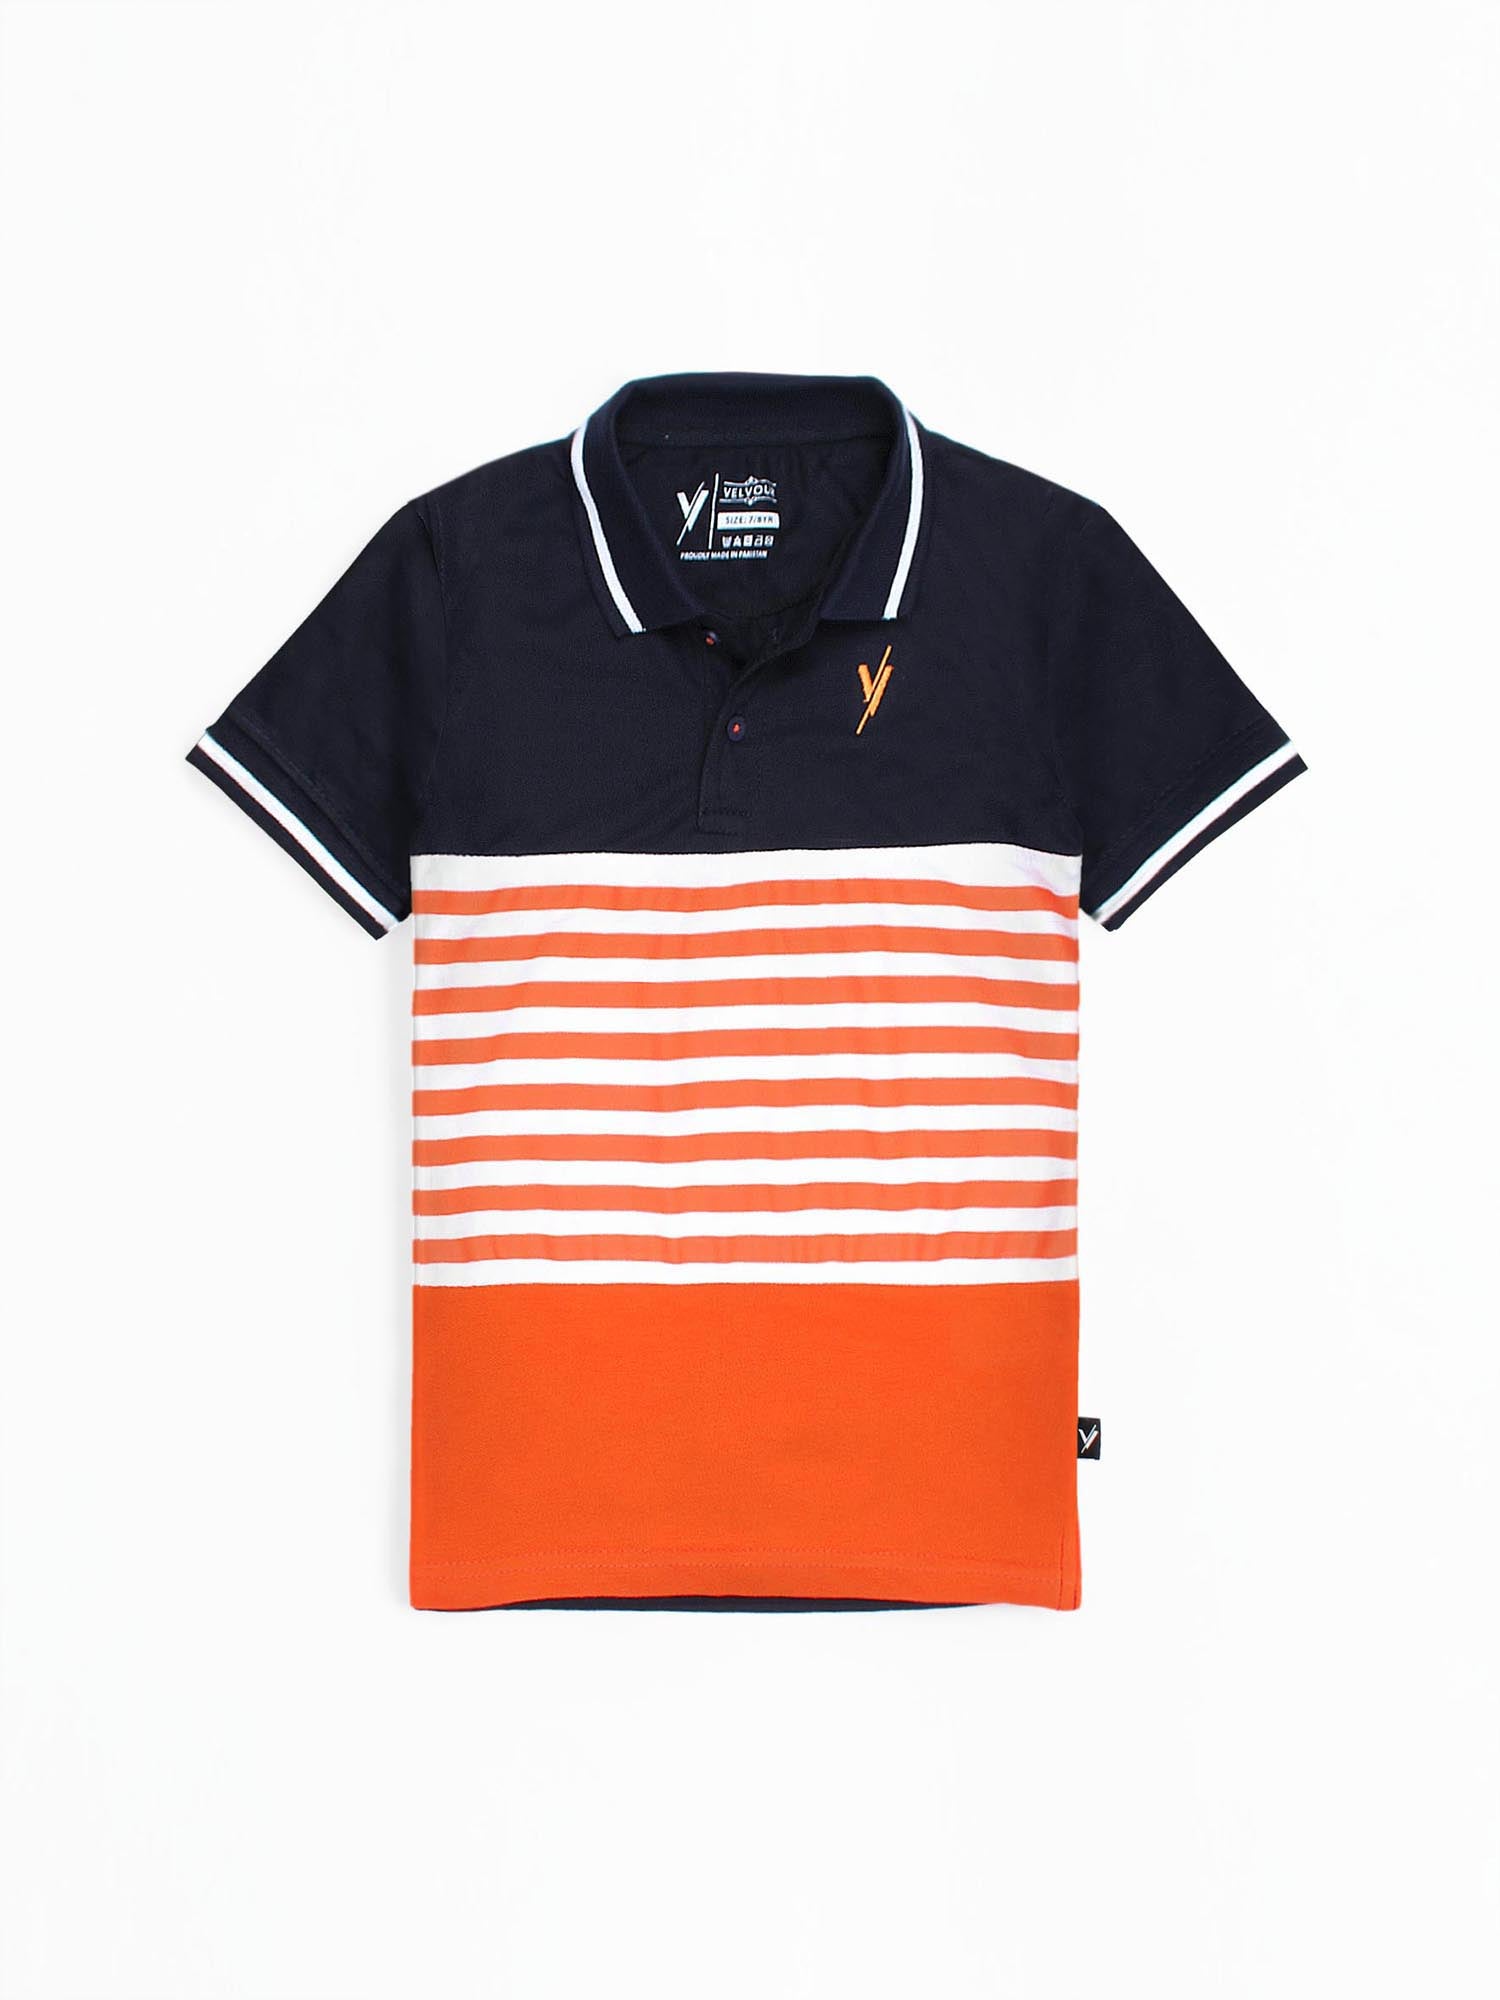 Tipping Collar Boys Polo Shirt Velvour Embroidered  Navy With Orange stripe